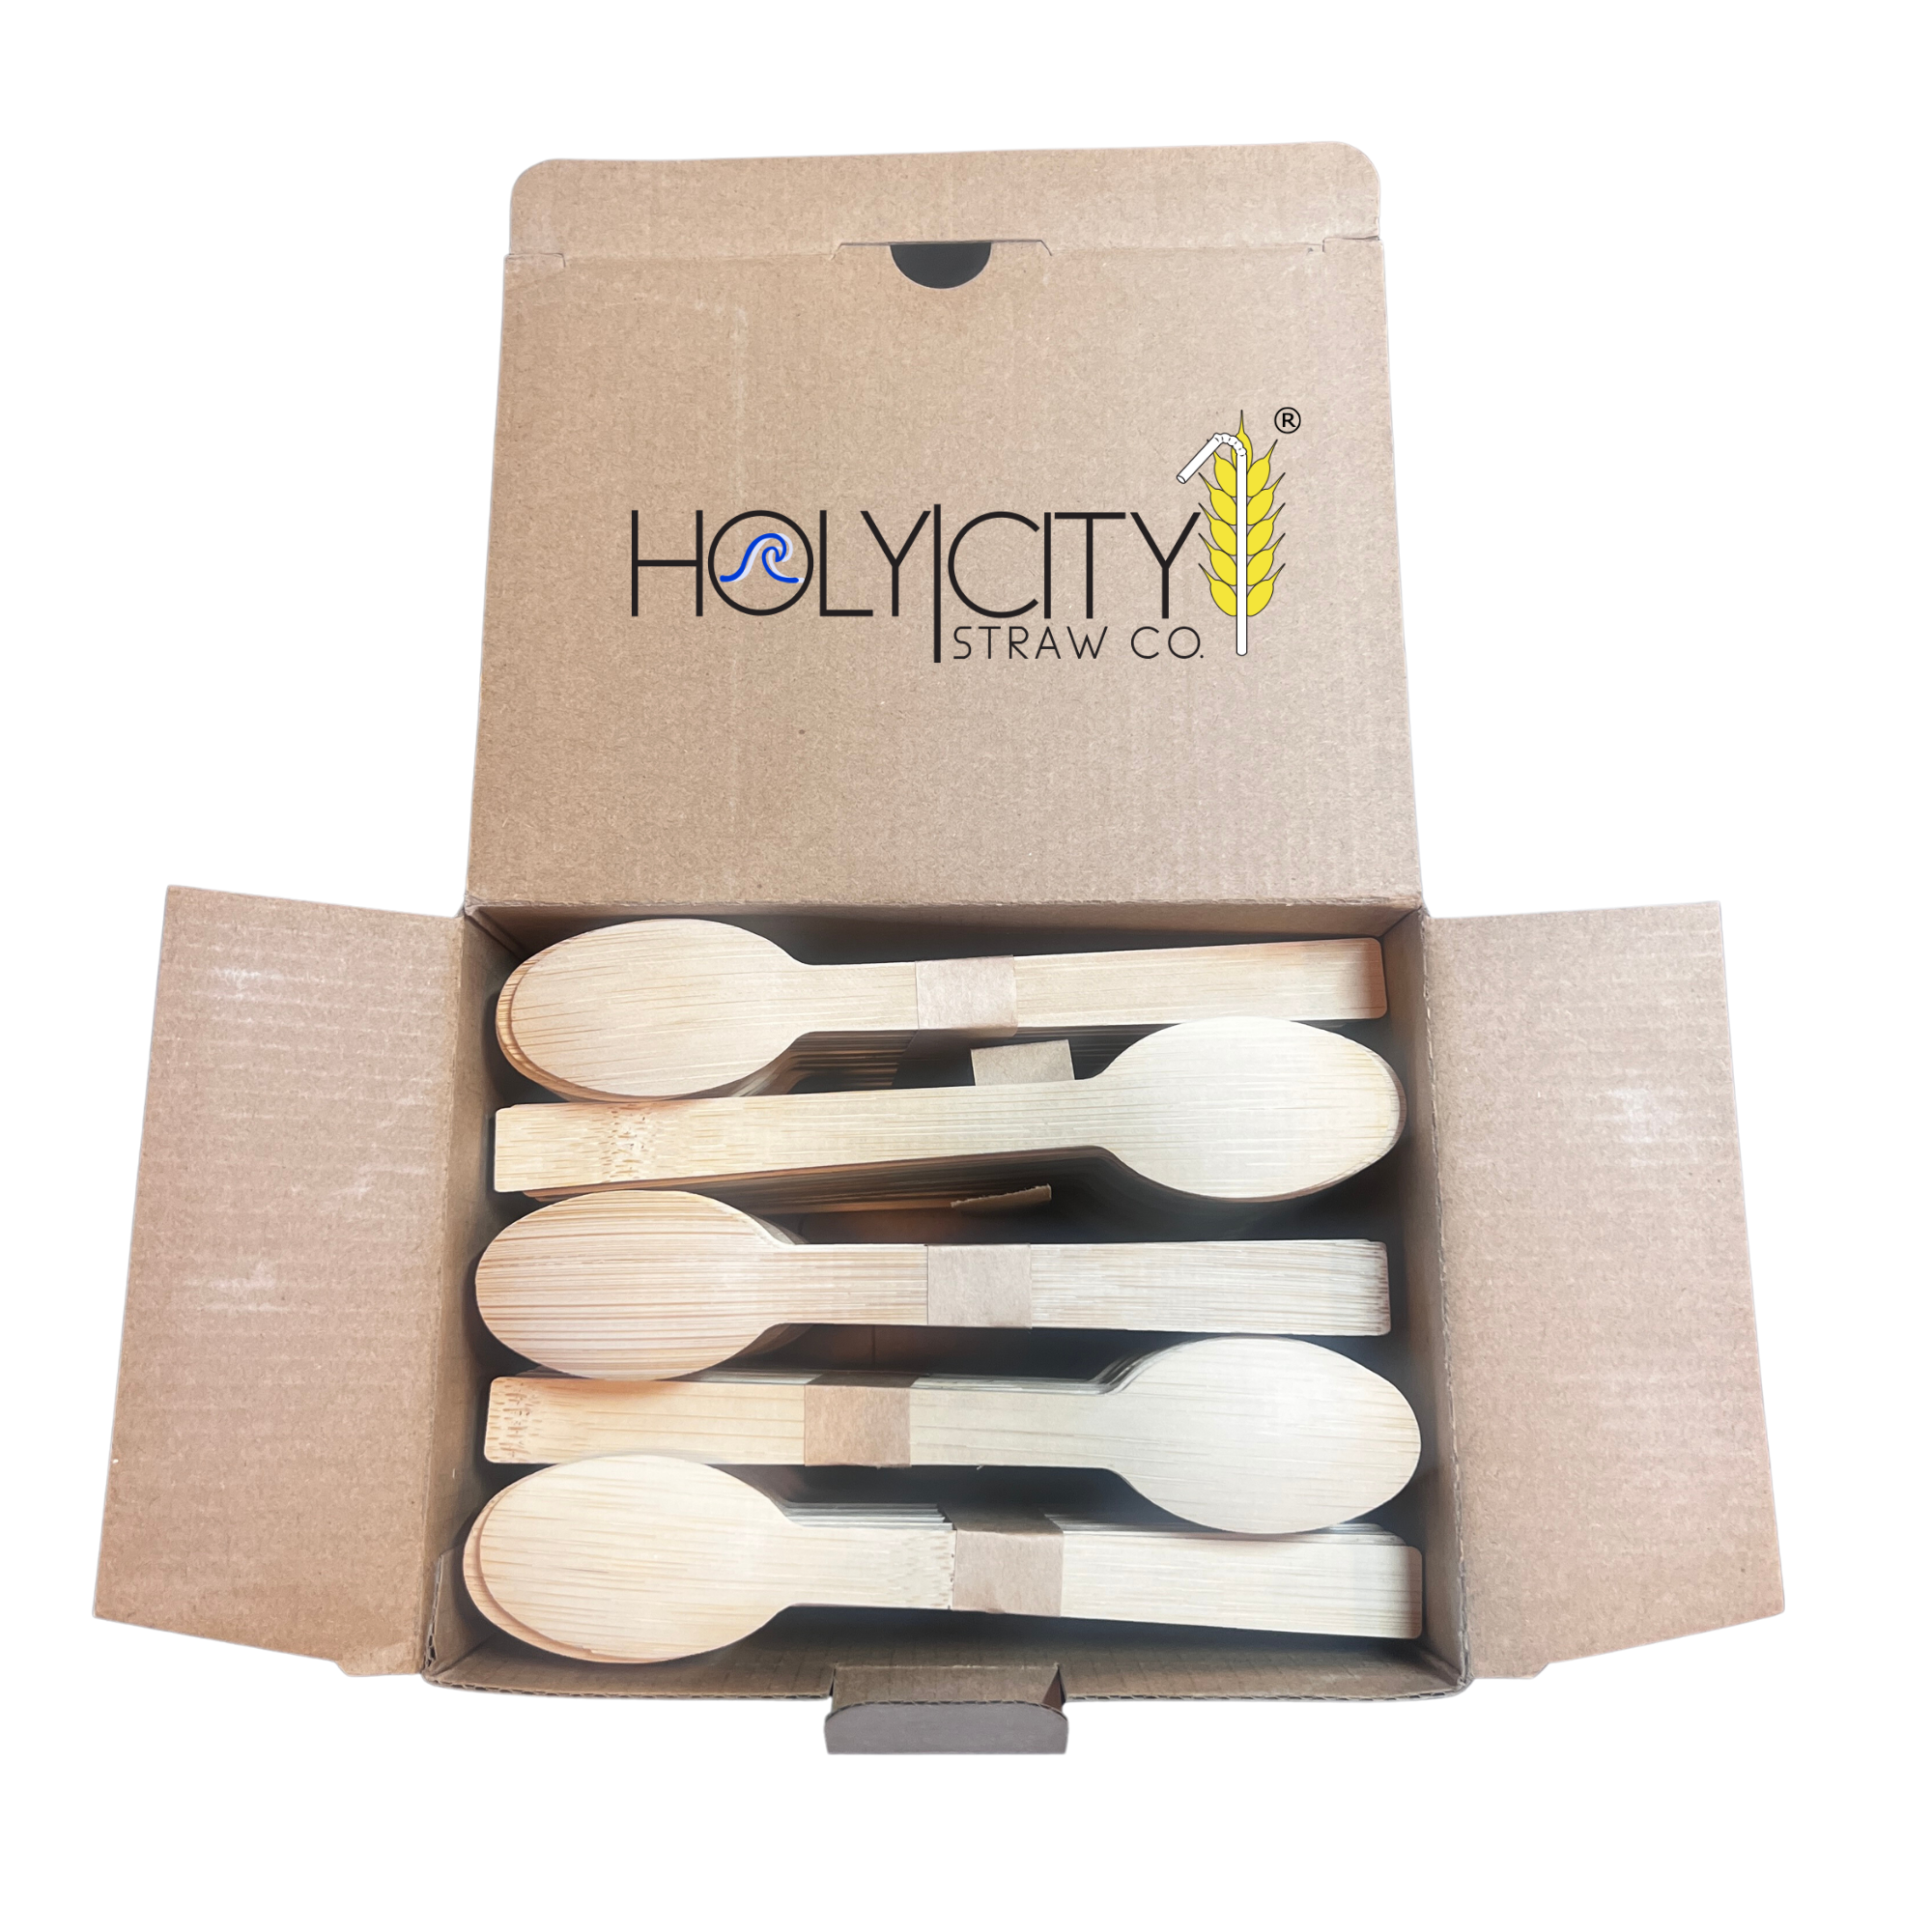 Holy City Straw Co. 500 count open box of unwrapped dessert spoons